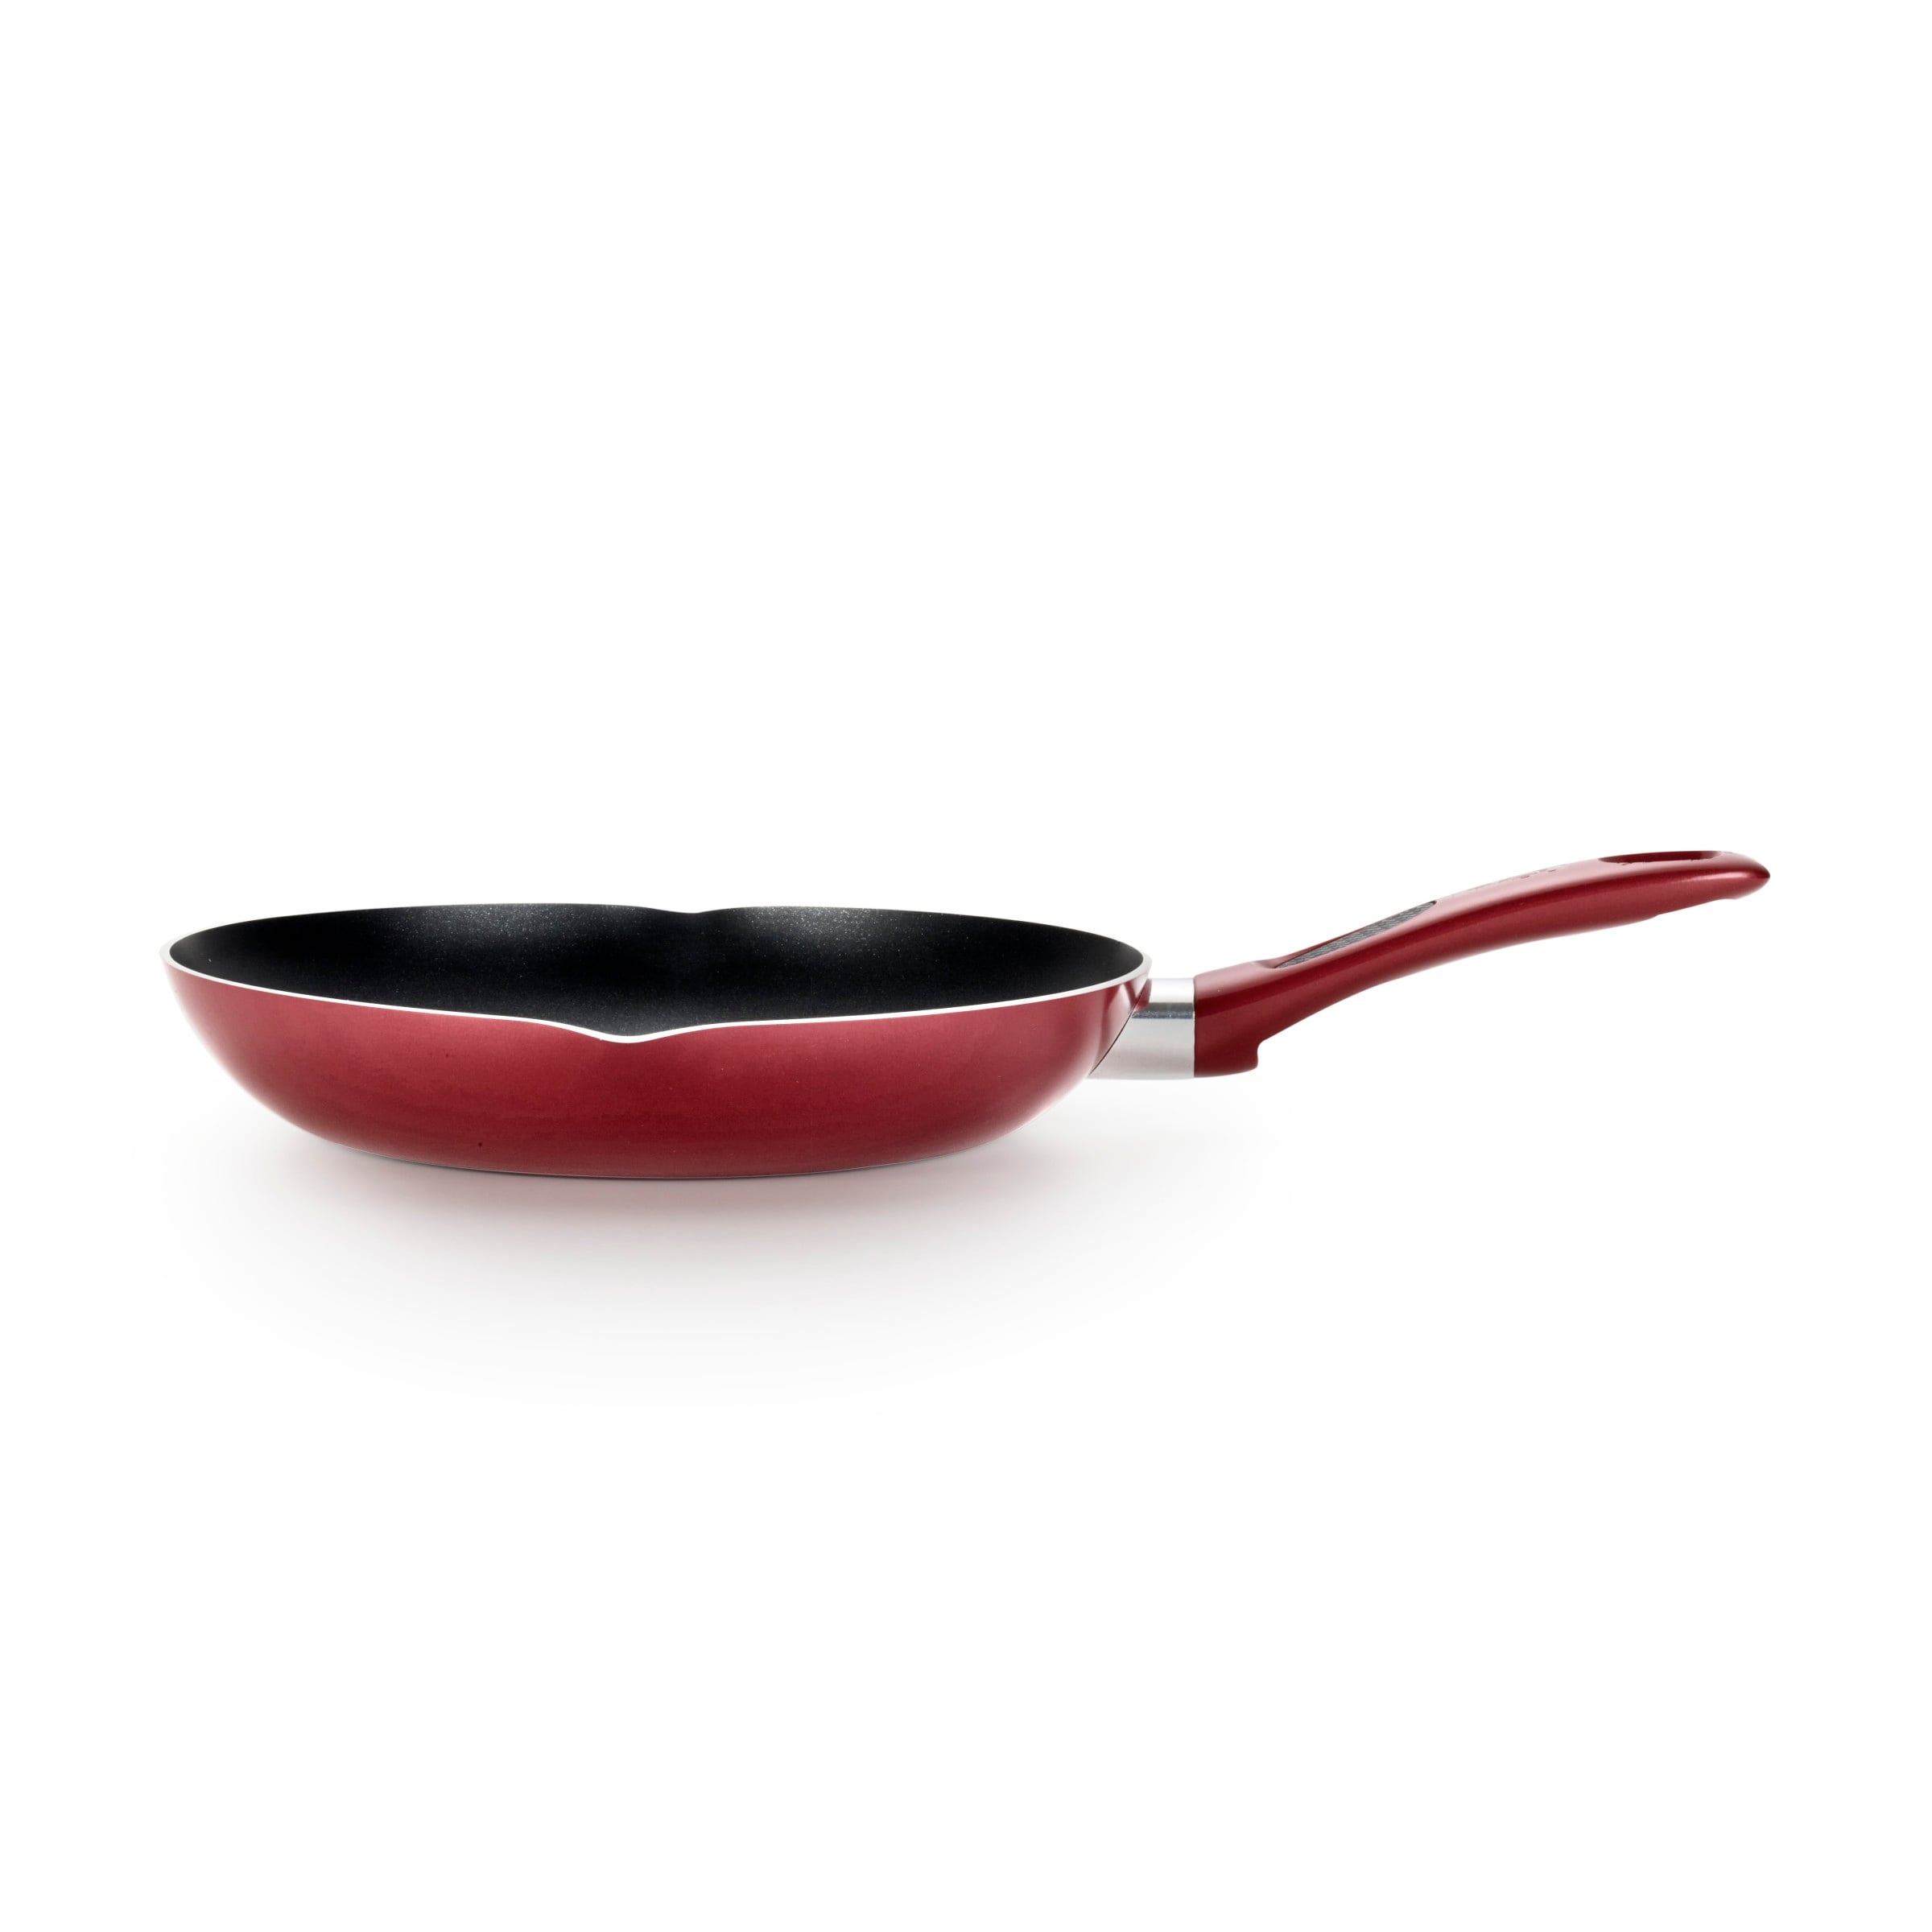 T-fal Simply Cook Nonstick Cookware, 2pc Fry Pan Set, 8 & 10, Red